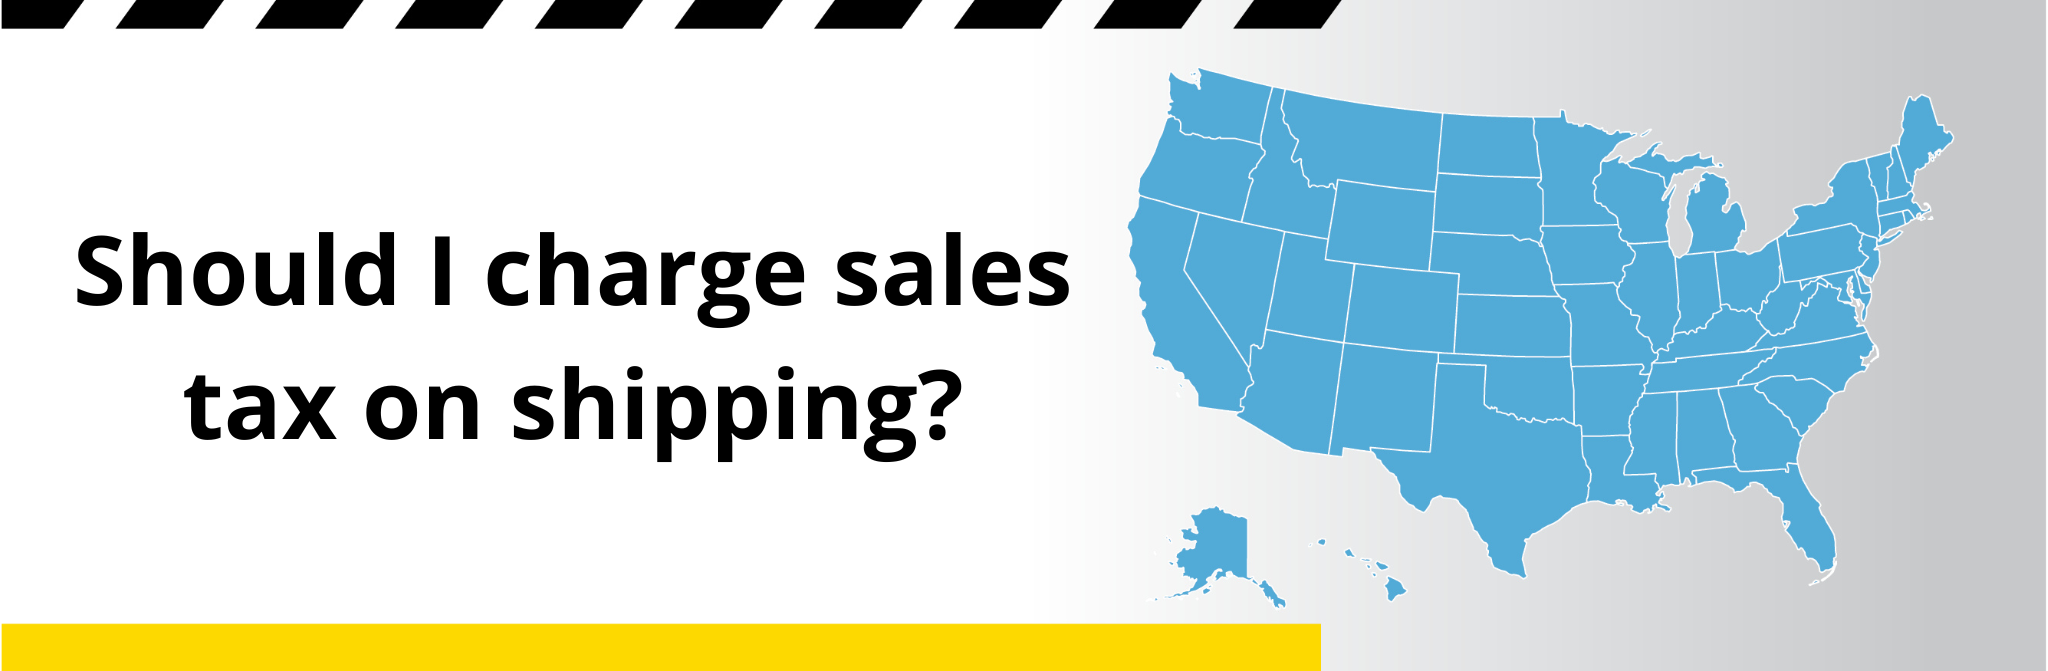 A blog header featuring a map of the US and asking "Should I charge sales tax on shipping charges?"